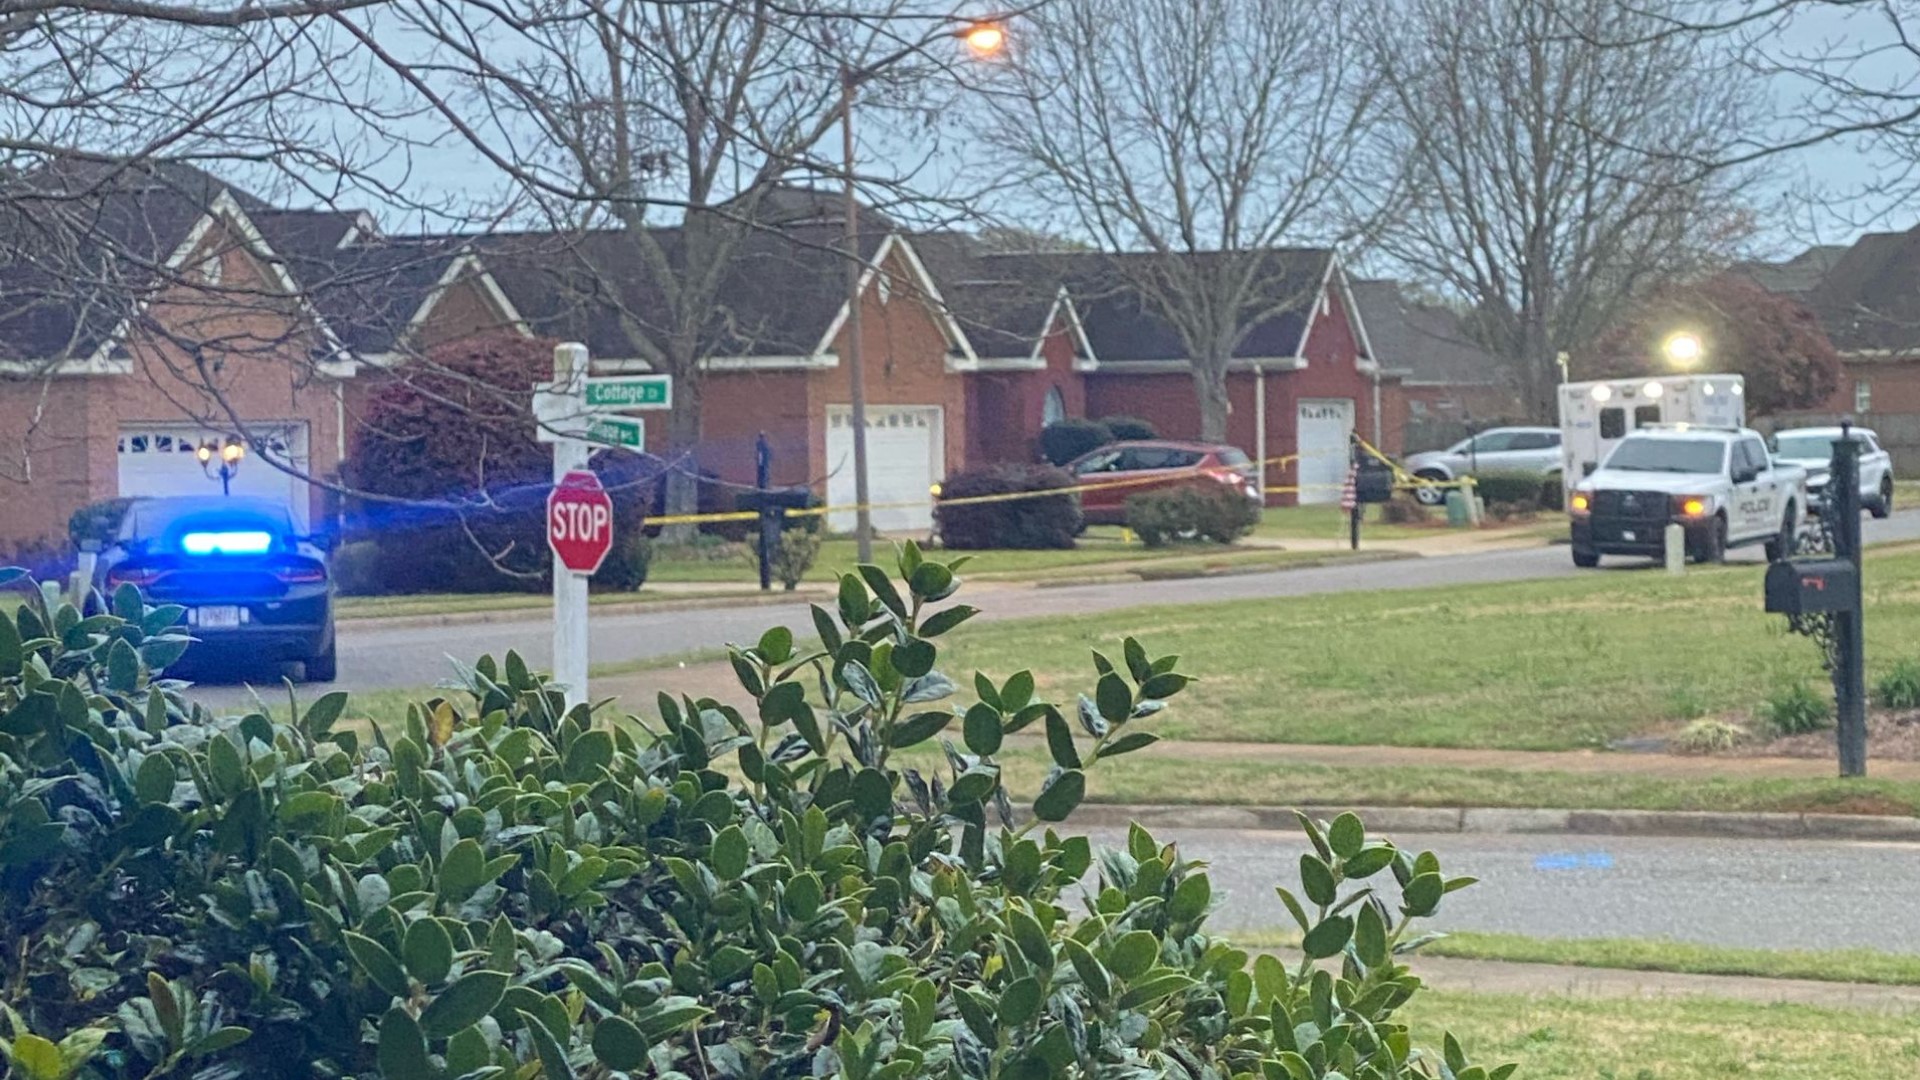 The GBI says a Houston County Special Response Team member shot and killed a man armed with a knife during a struggle after he didn't obey verbal commands